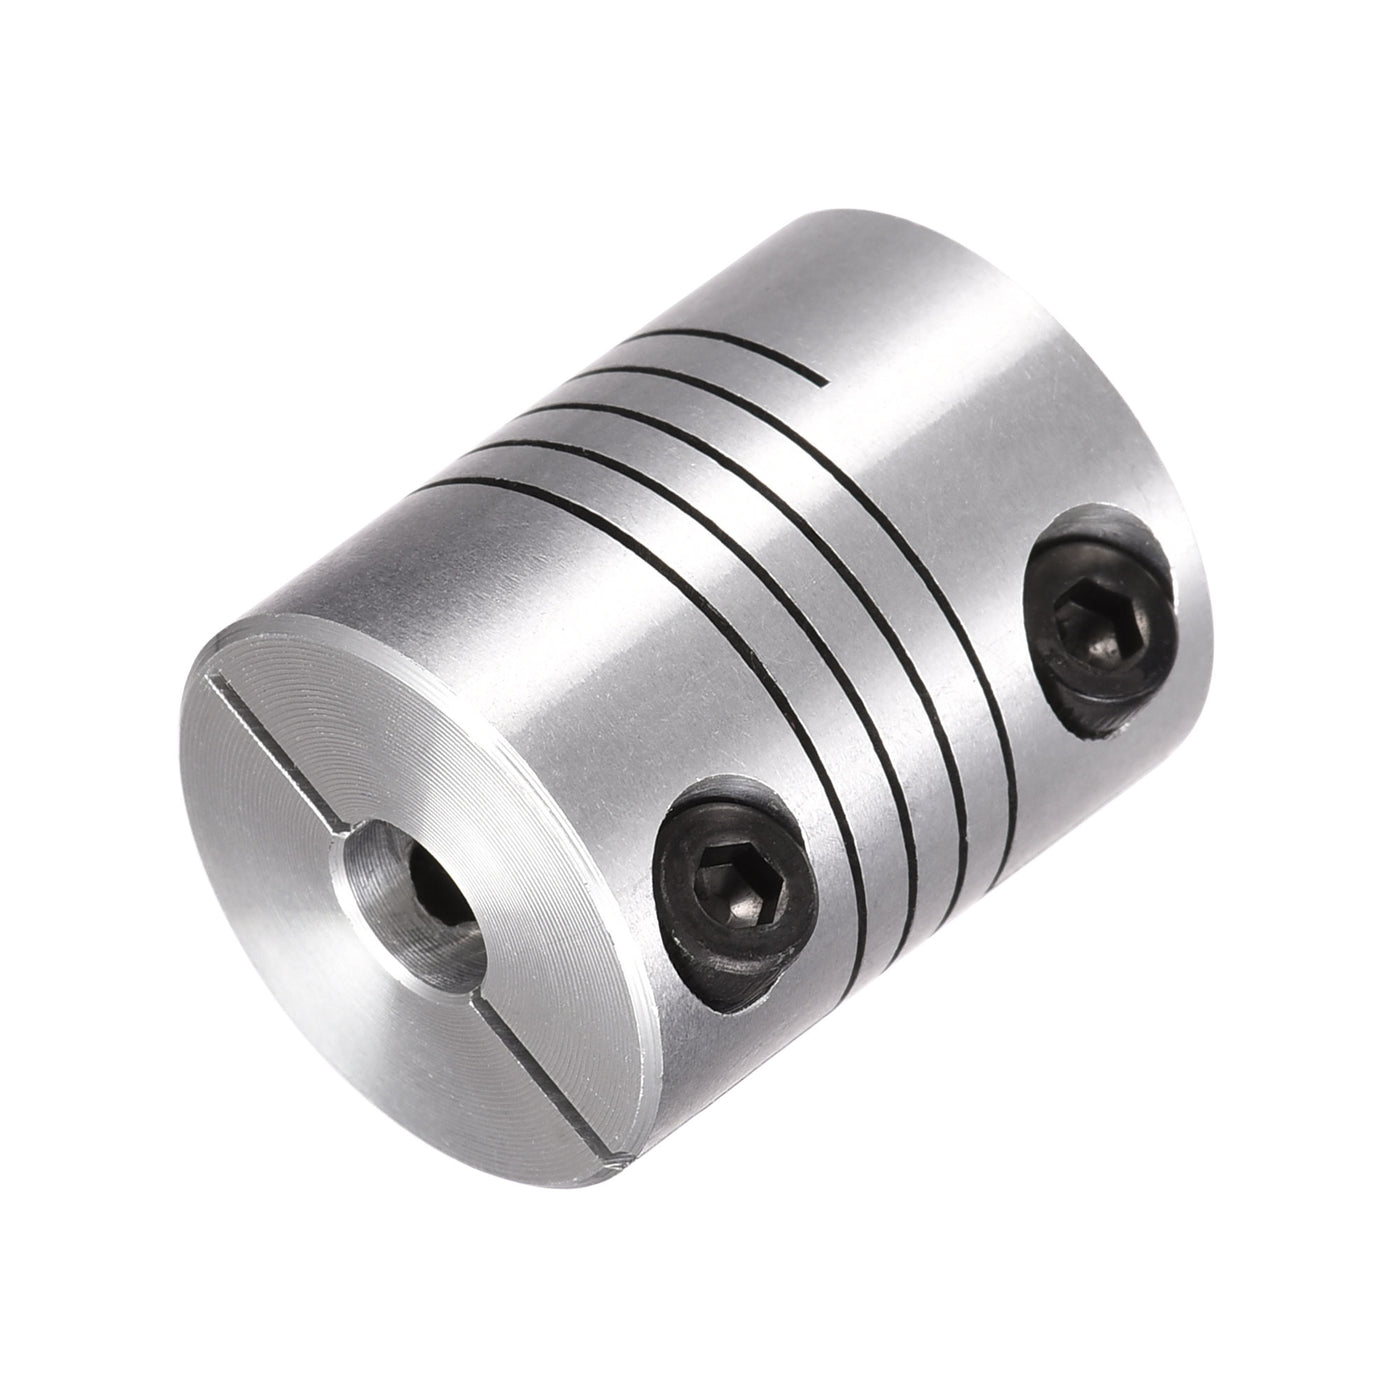 uxcell Uxcell 2PCS Motor Shaft 6mm to 6mm Helical Beam Coupler Coupling 20mm Dia 25mm Length